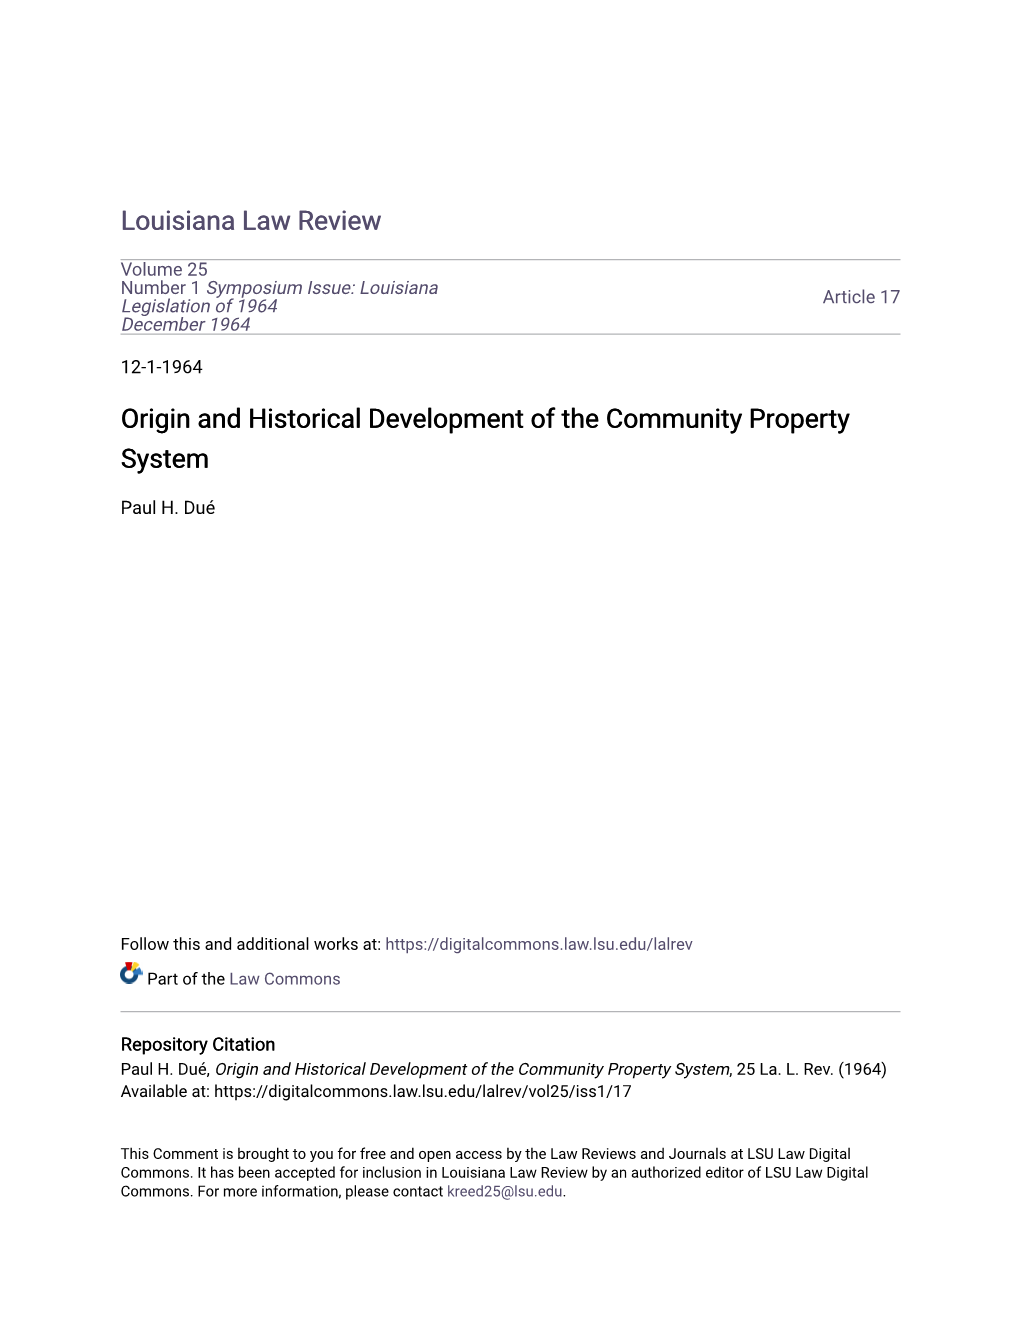 Origin and Historical Development of the Community Property System